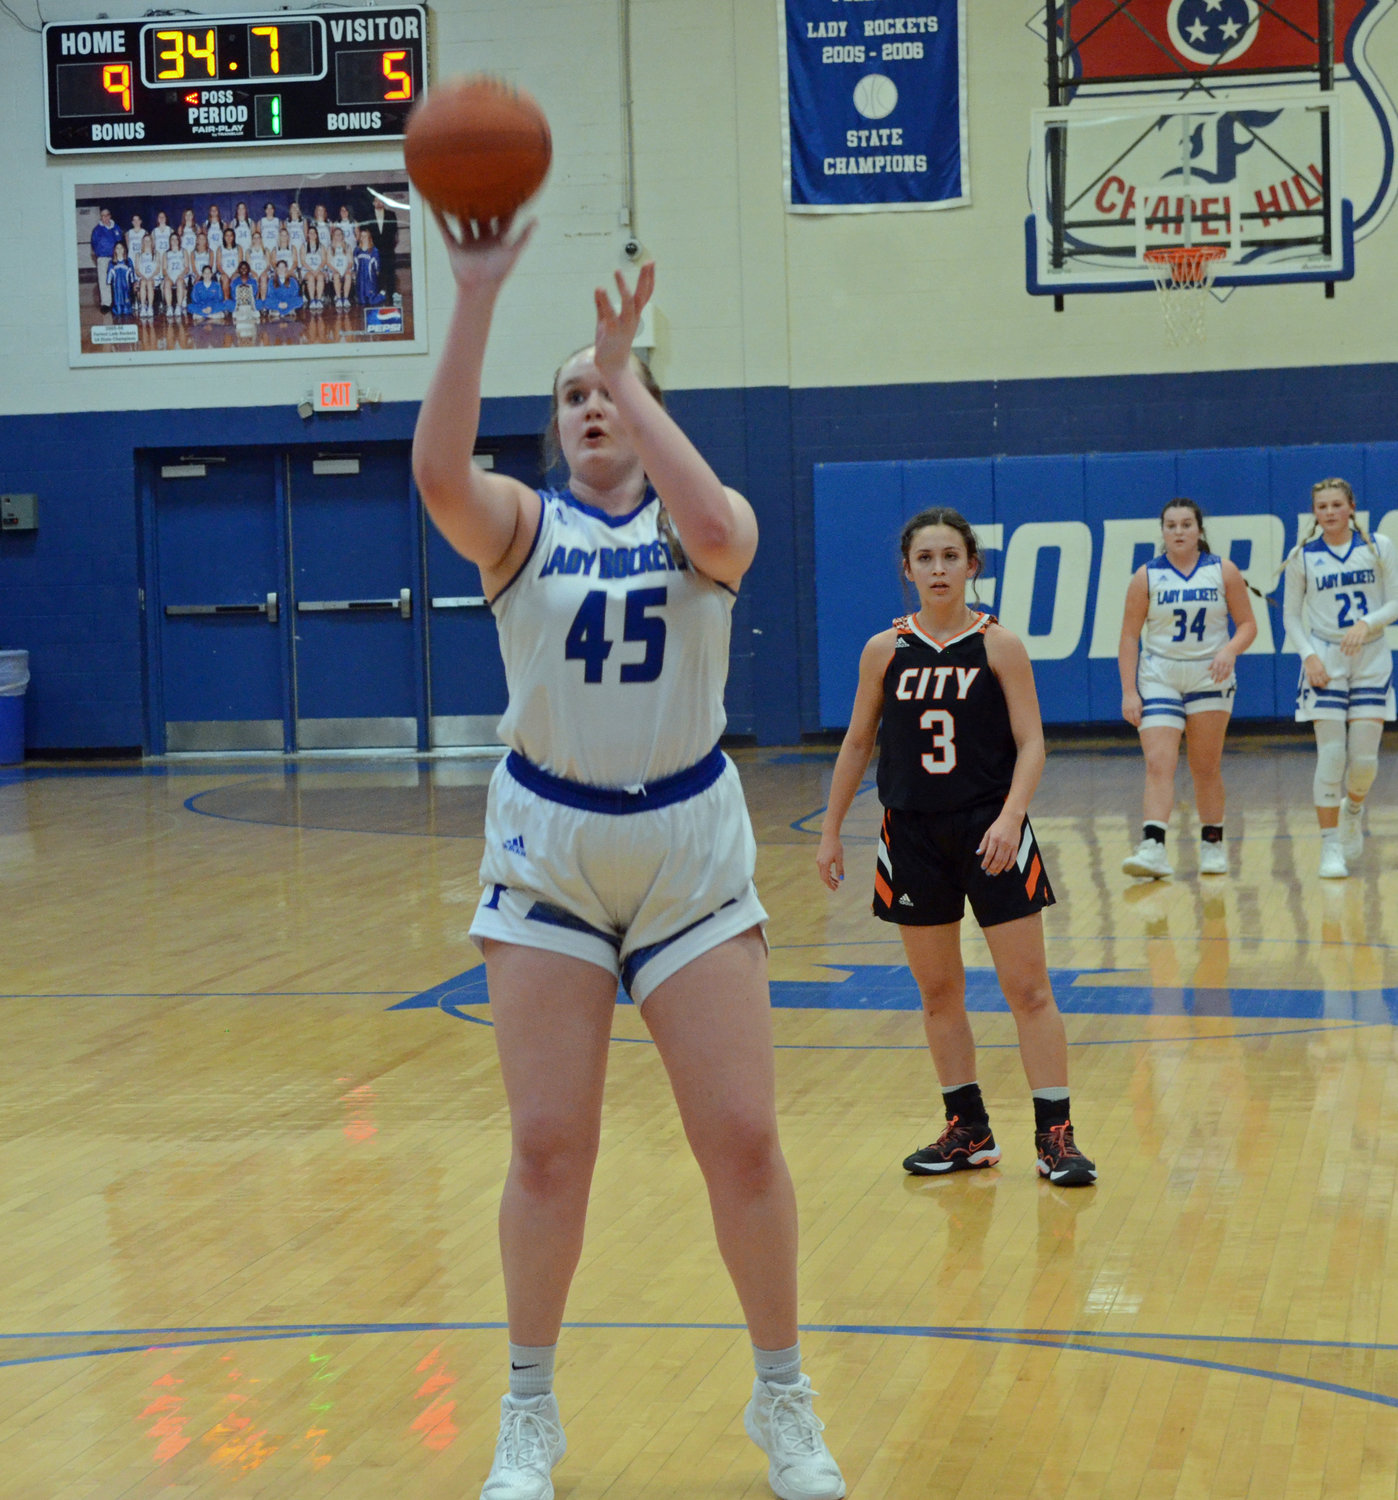 Cadence Chapman had four field goals and went a perfect 4-for-4 from the free throw line versus the Lady Tigers.